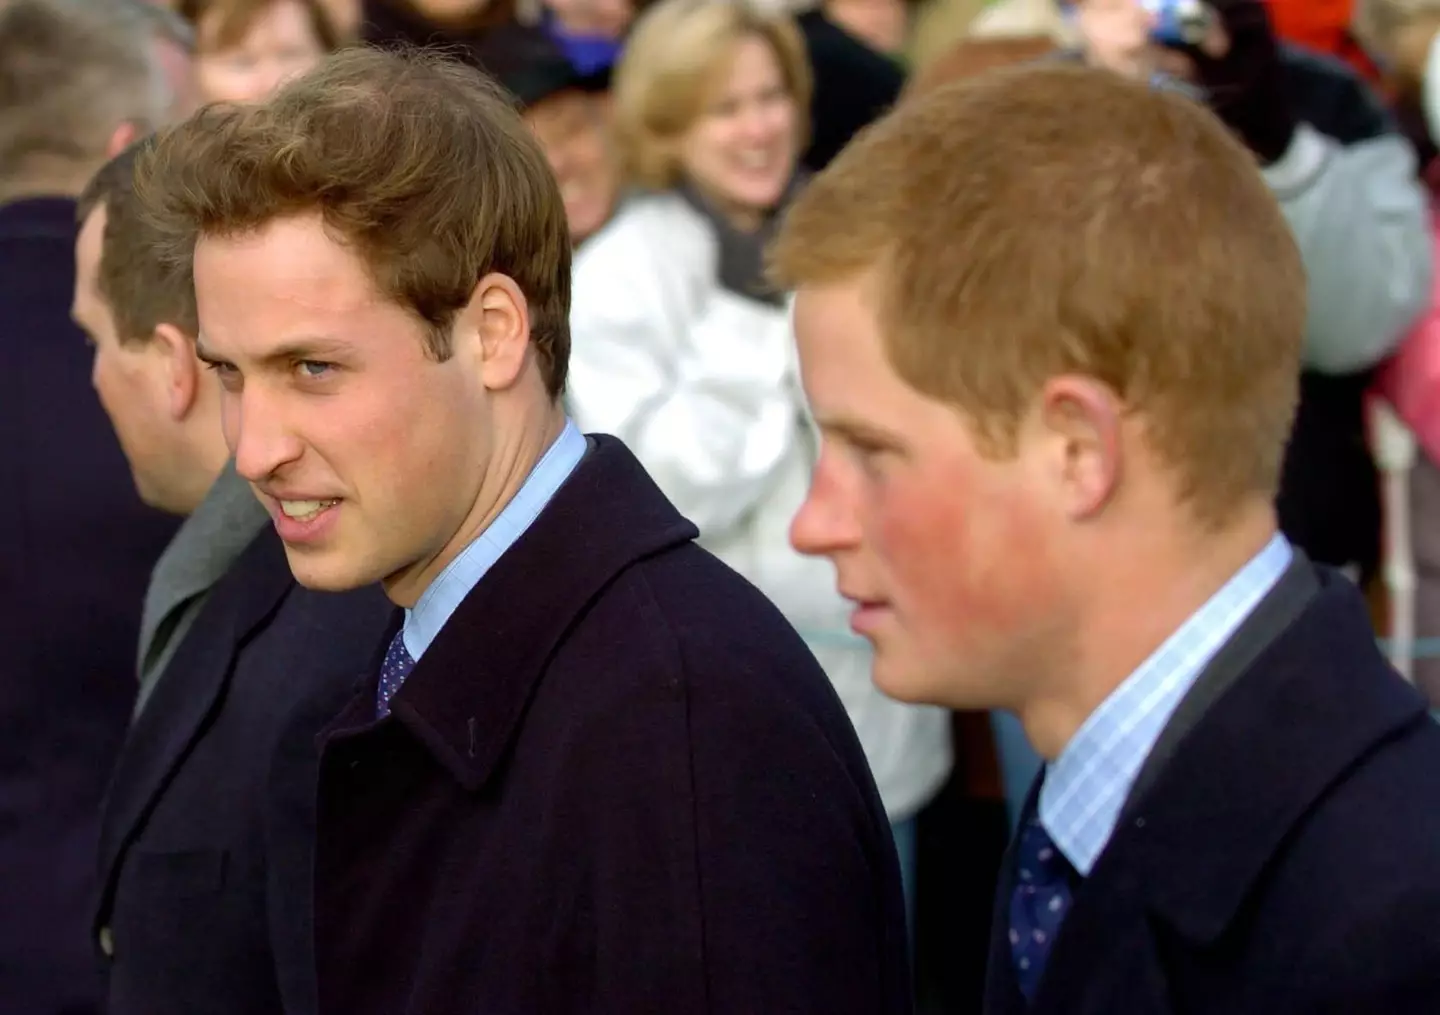 Harry and William in 2005.